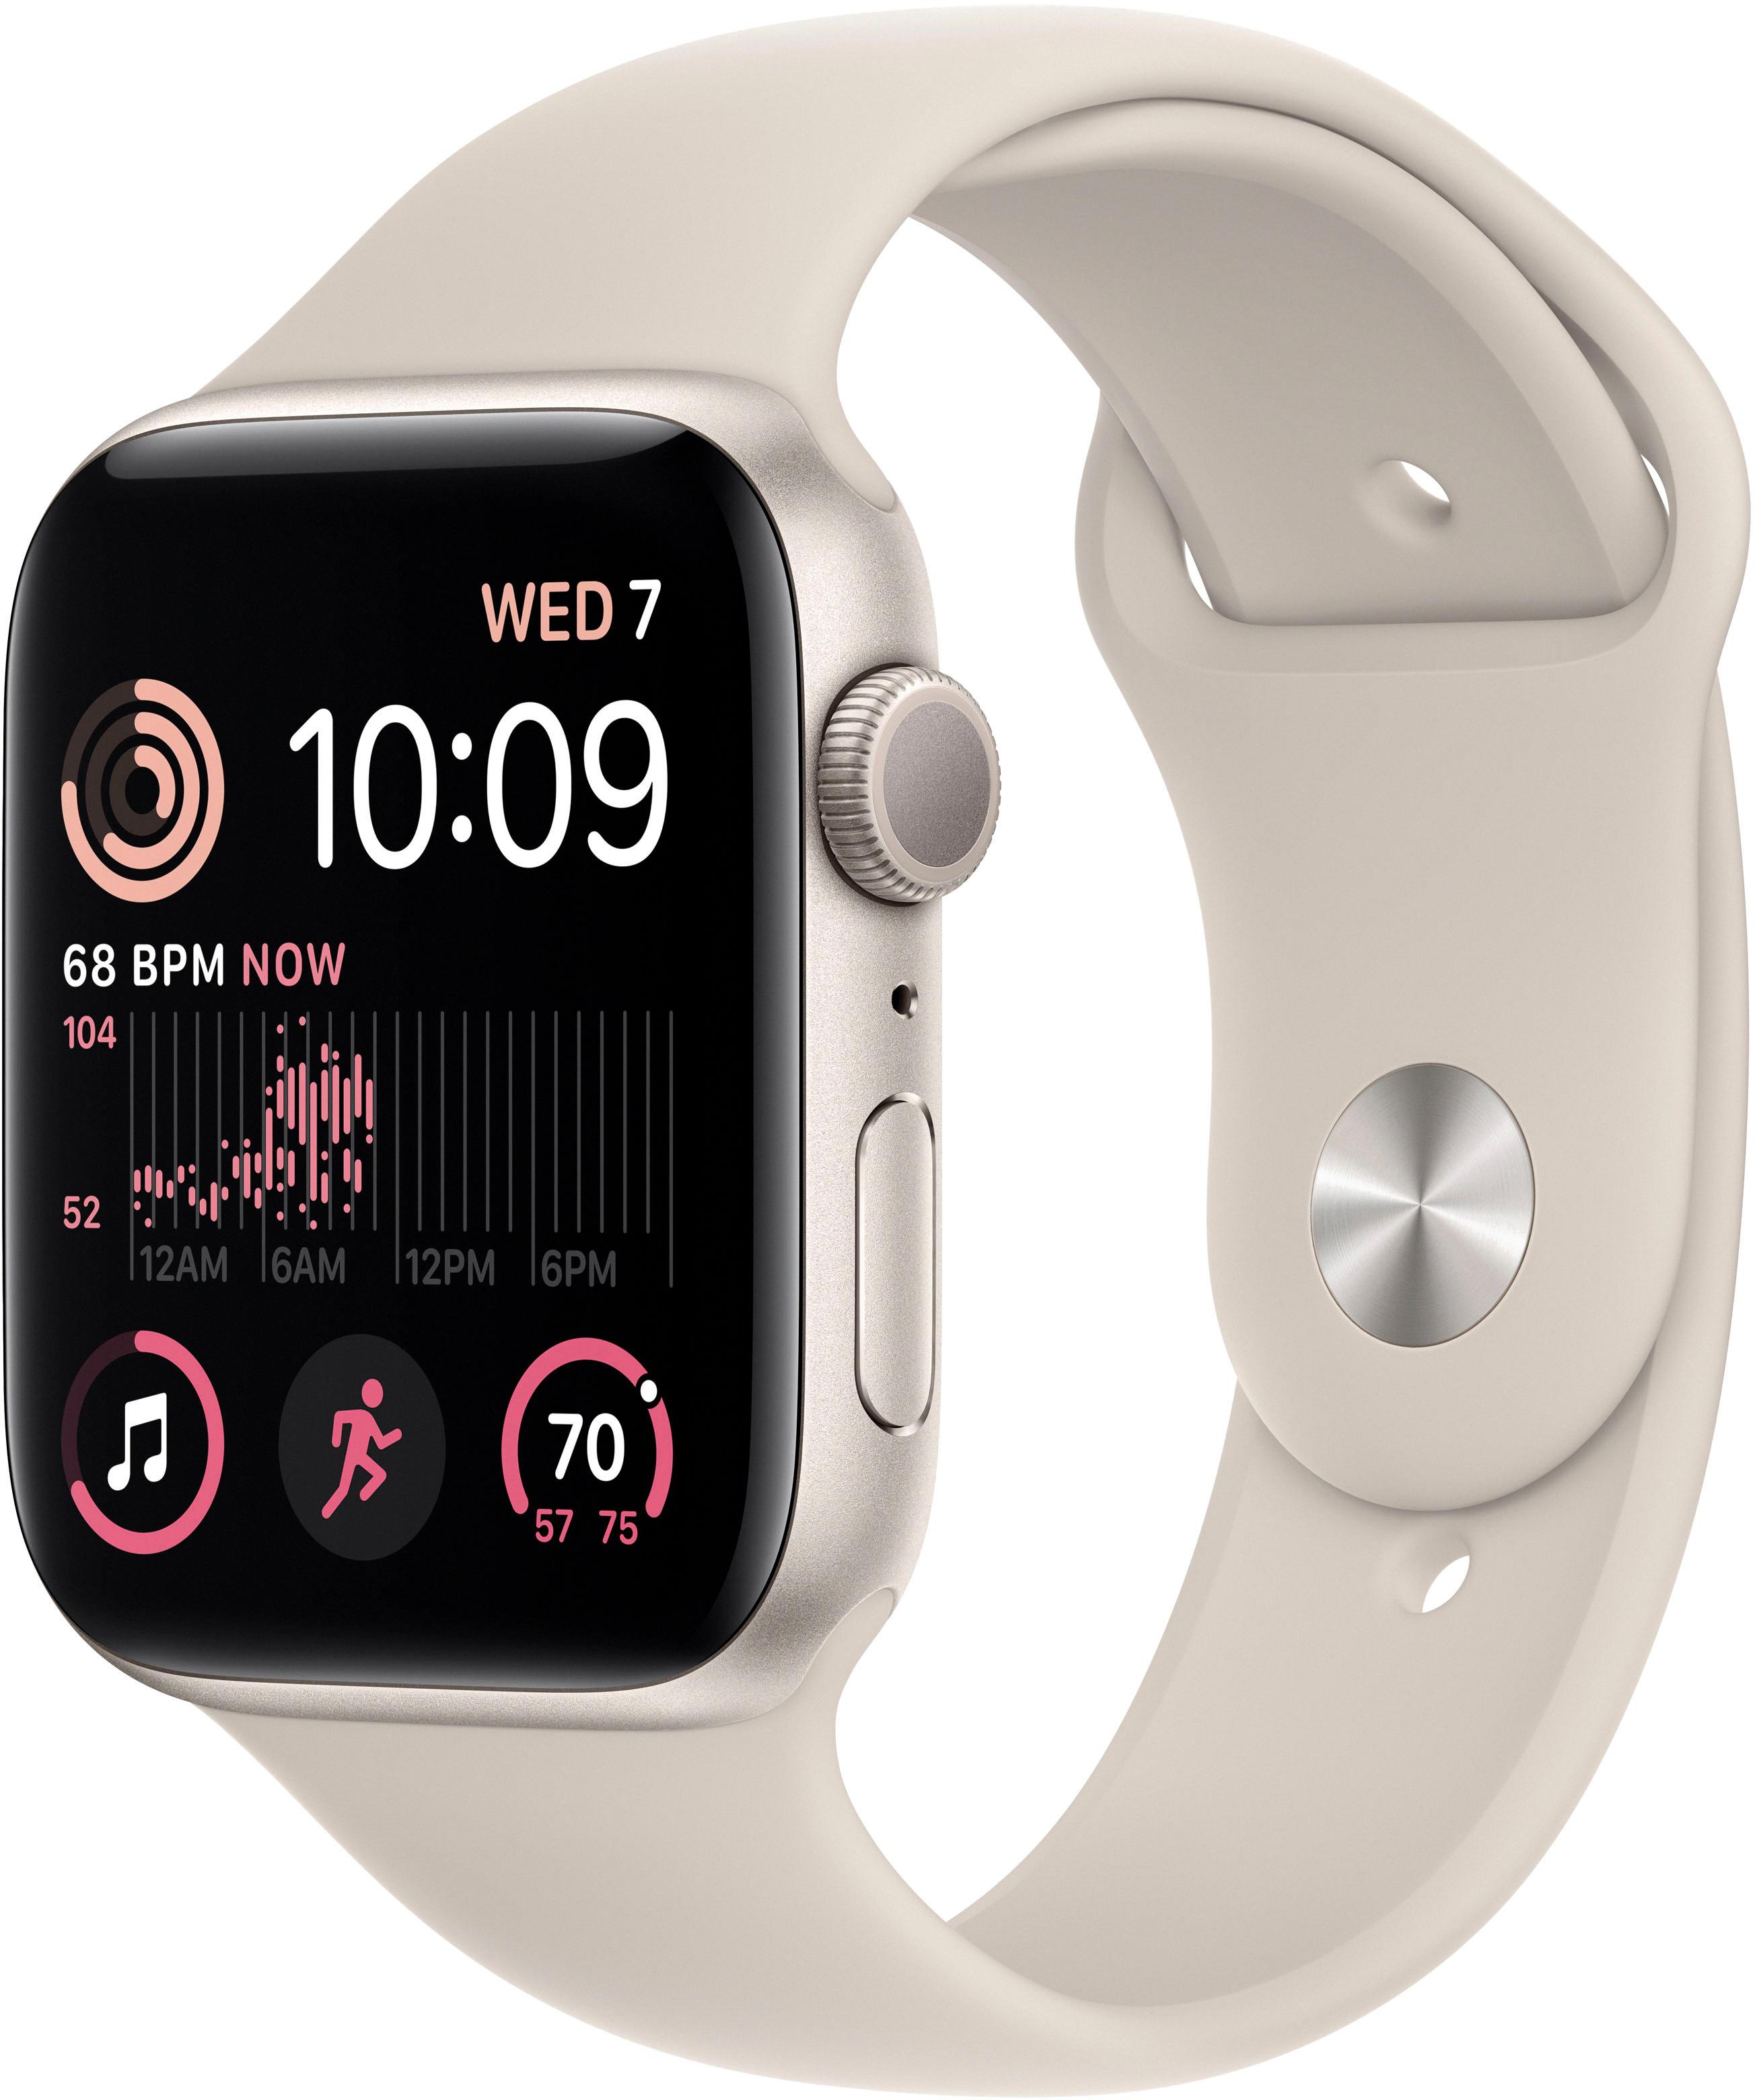 Discover the Best Apple Watch App for Horse Riding 15